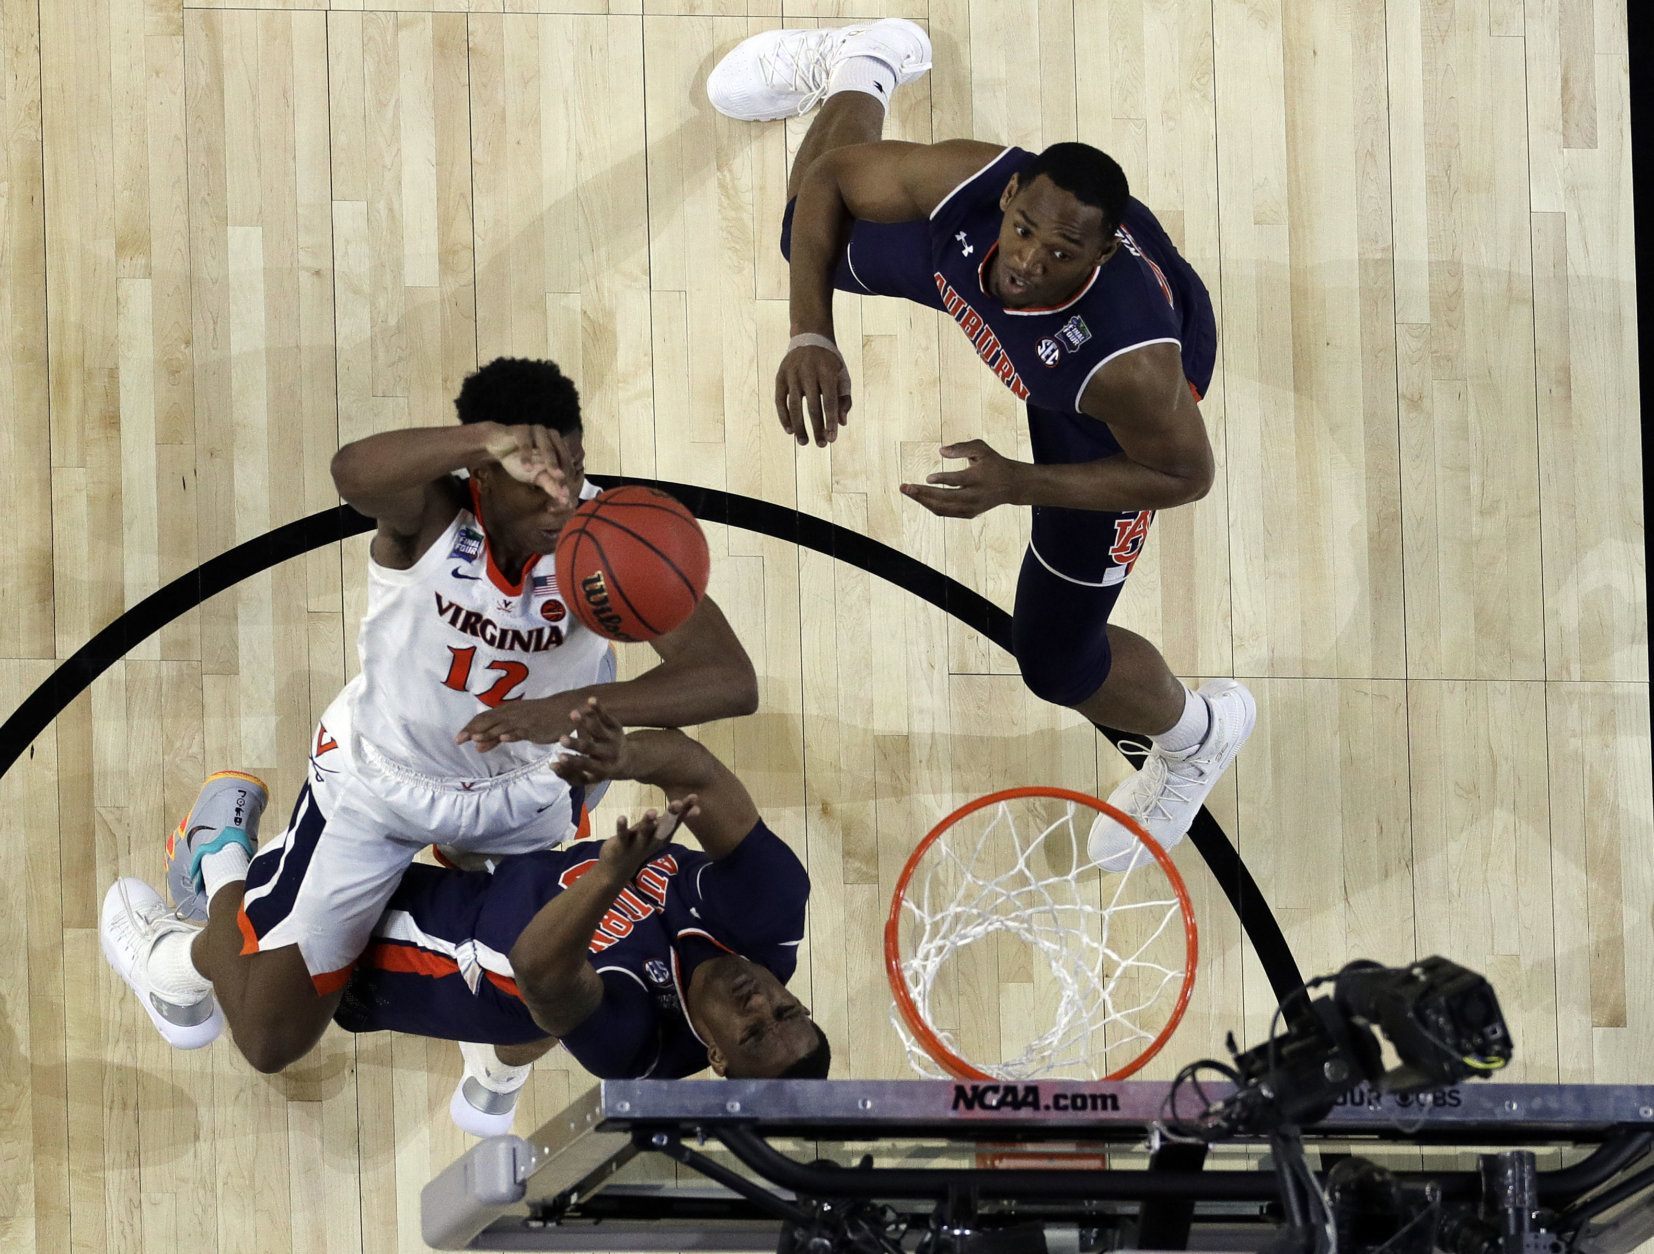 Virginia's De'Andre Hunter (12) takes a shot against Auburn's Horace Spencer (0) during the second half in the semifinals of the Final Four NCAA college basketball tournament, Saturday, April 6, 2019, in Minneapolis. (AP Photo/David J. Phillip)